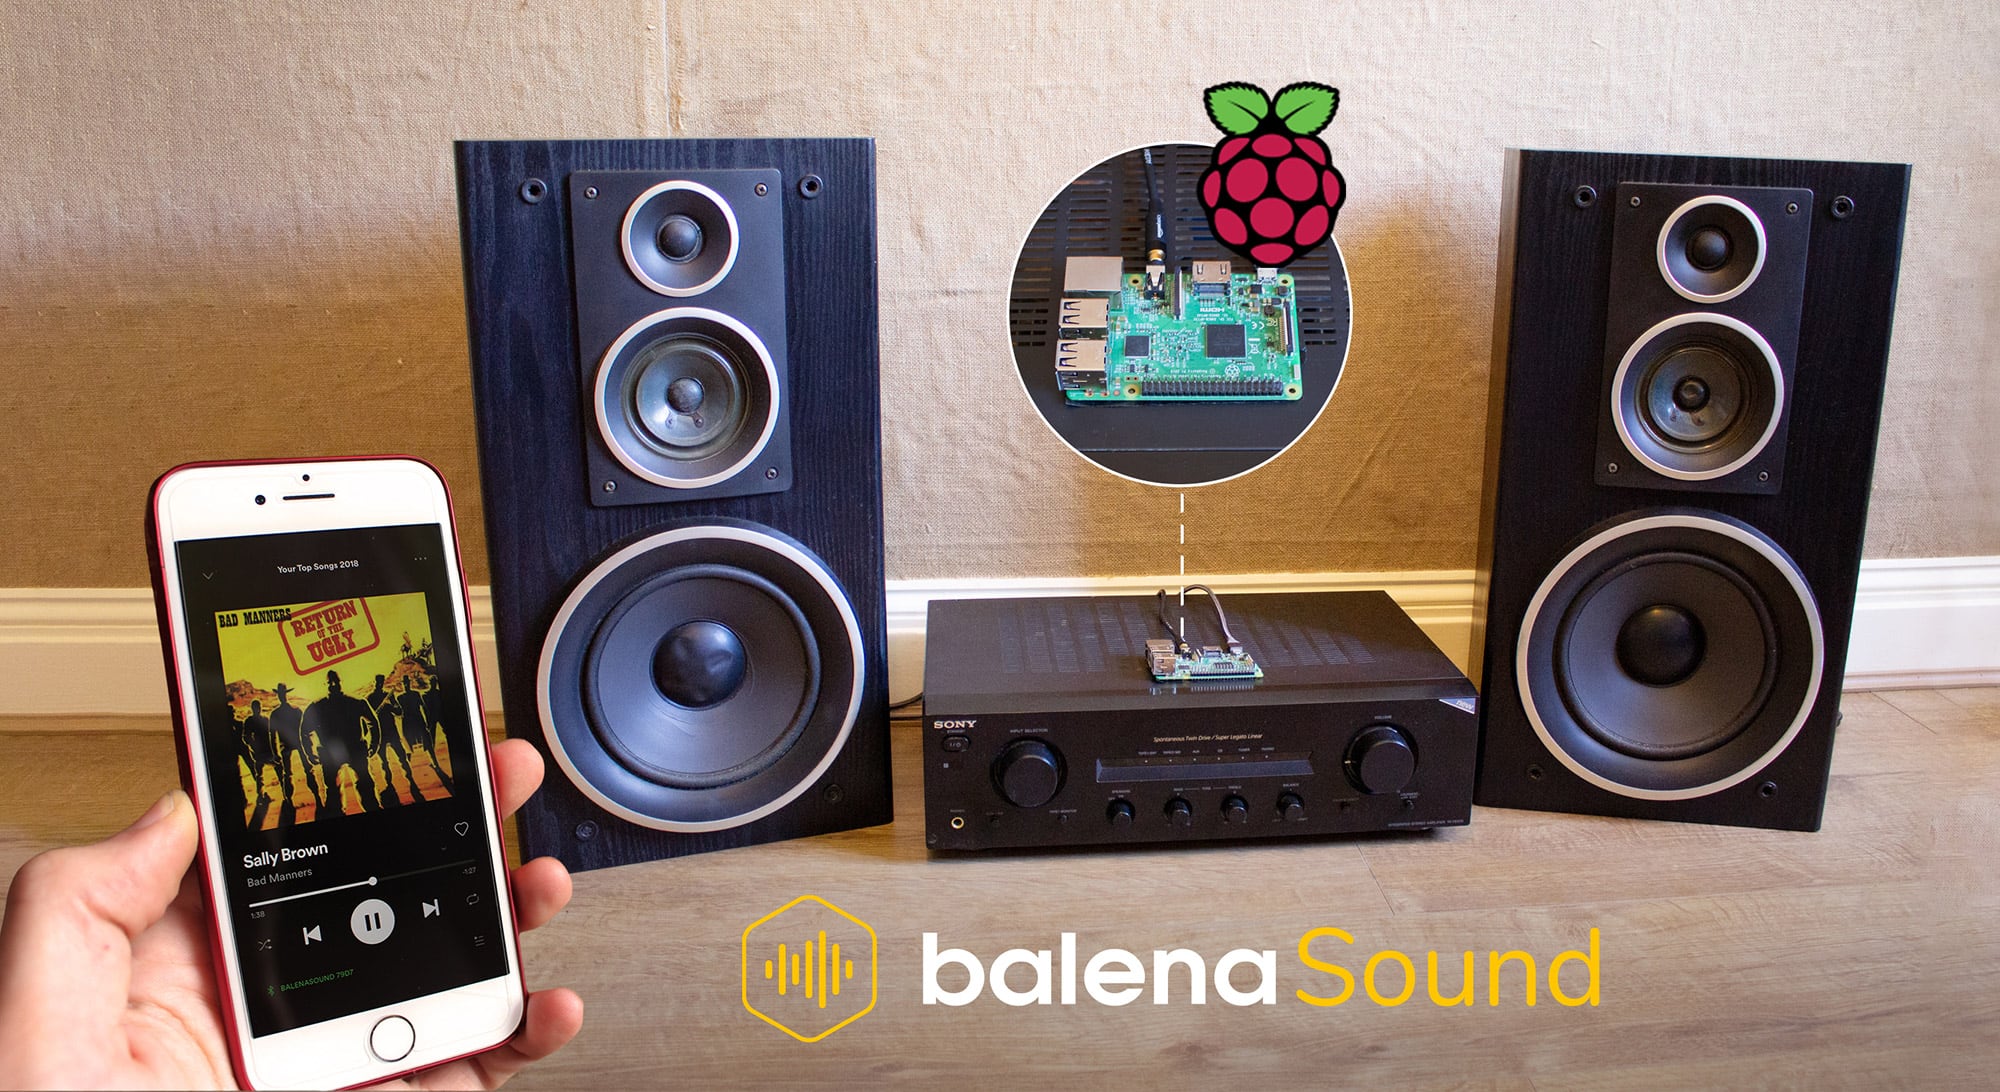 Turn your old speakers or Hi-Fi into Bluetooth, Airplay and Spotify receivers with a Raspberry Pi and this step-by-step guide